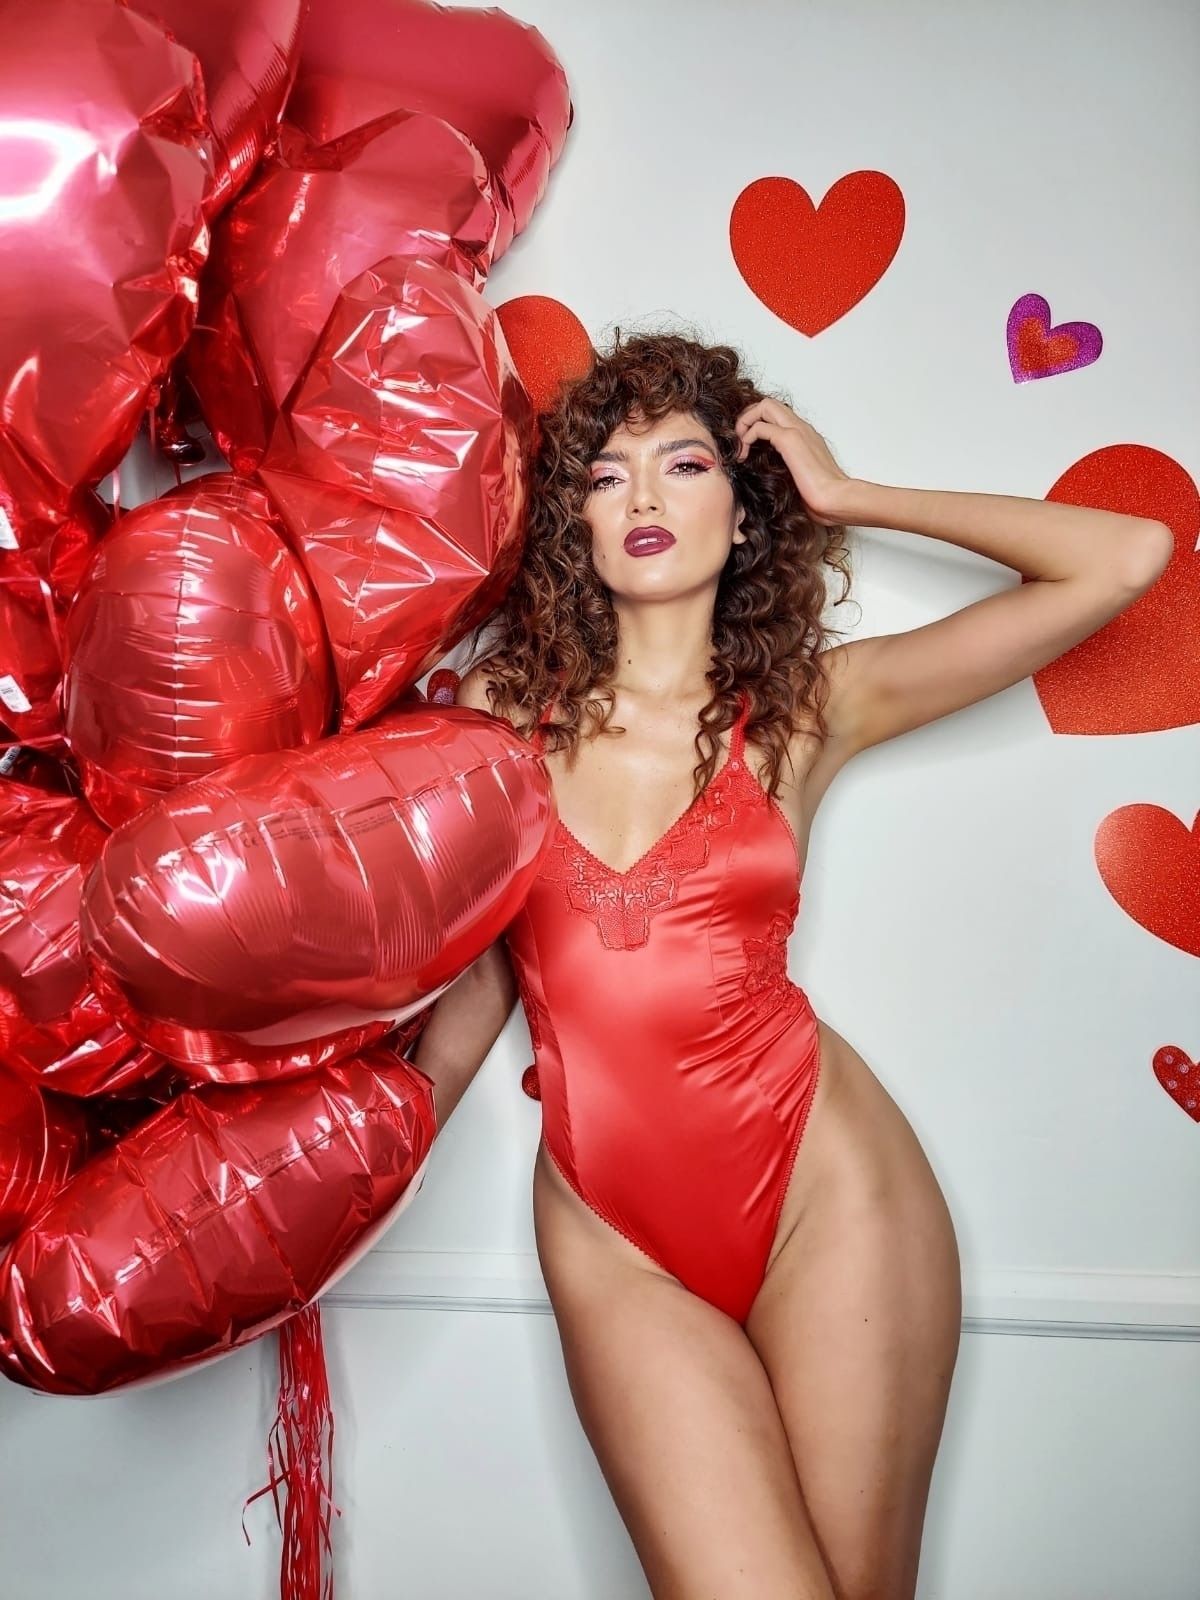 Celebrate Valentine's Week in Style: 8th February Gallery of Sultry Seduction